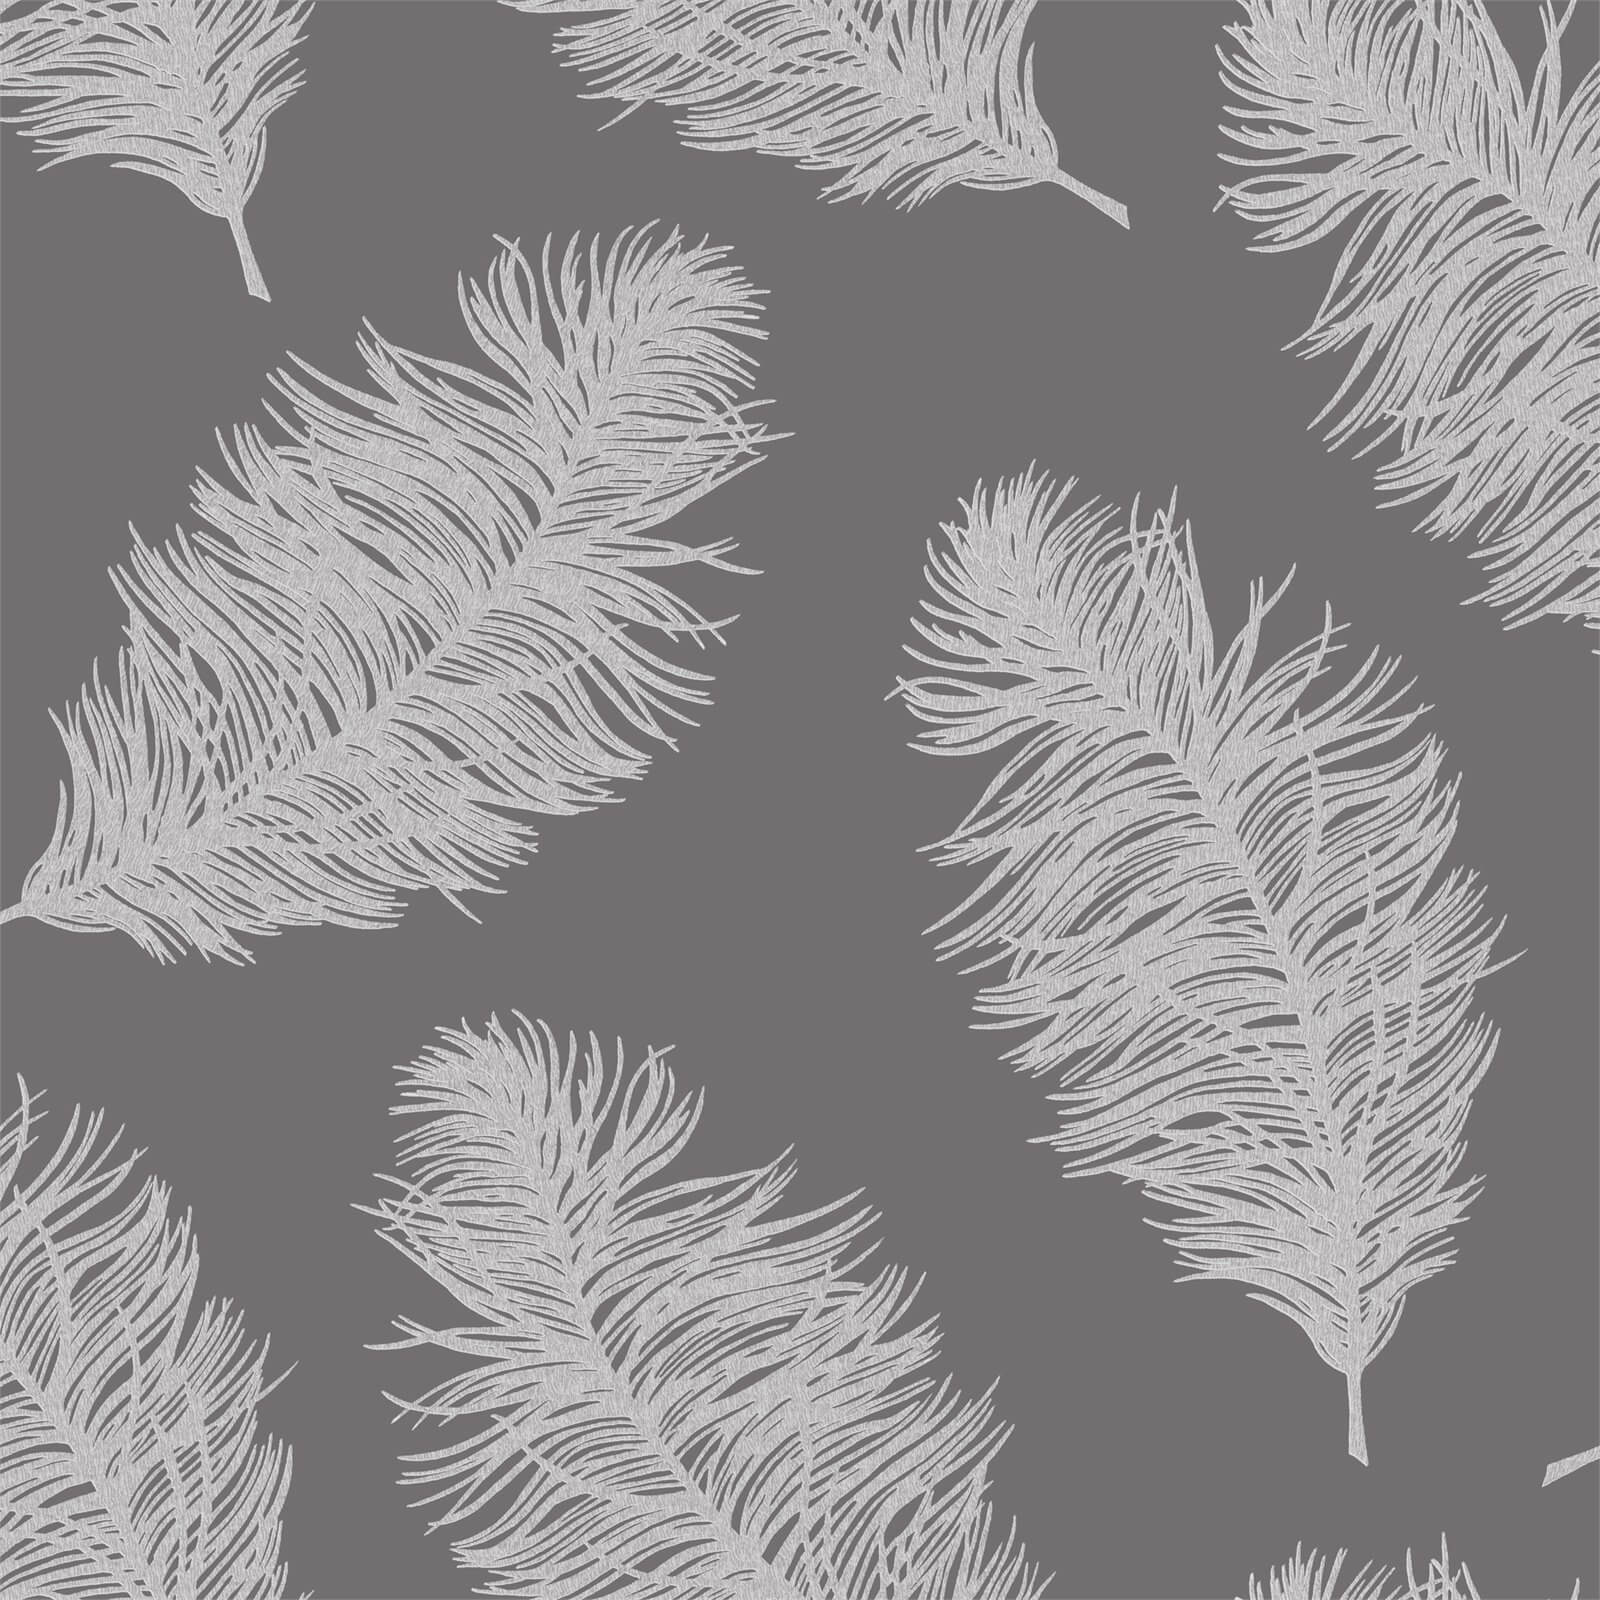 Holden Decor Hawthorn Feathers Smooth Grey Wallpaper